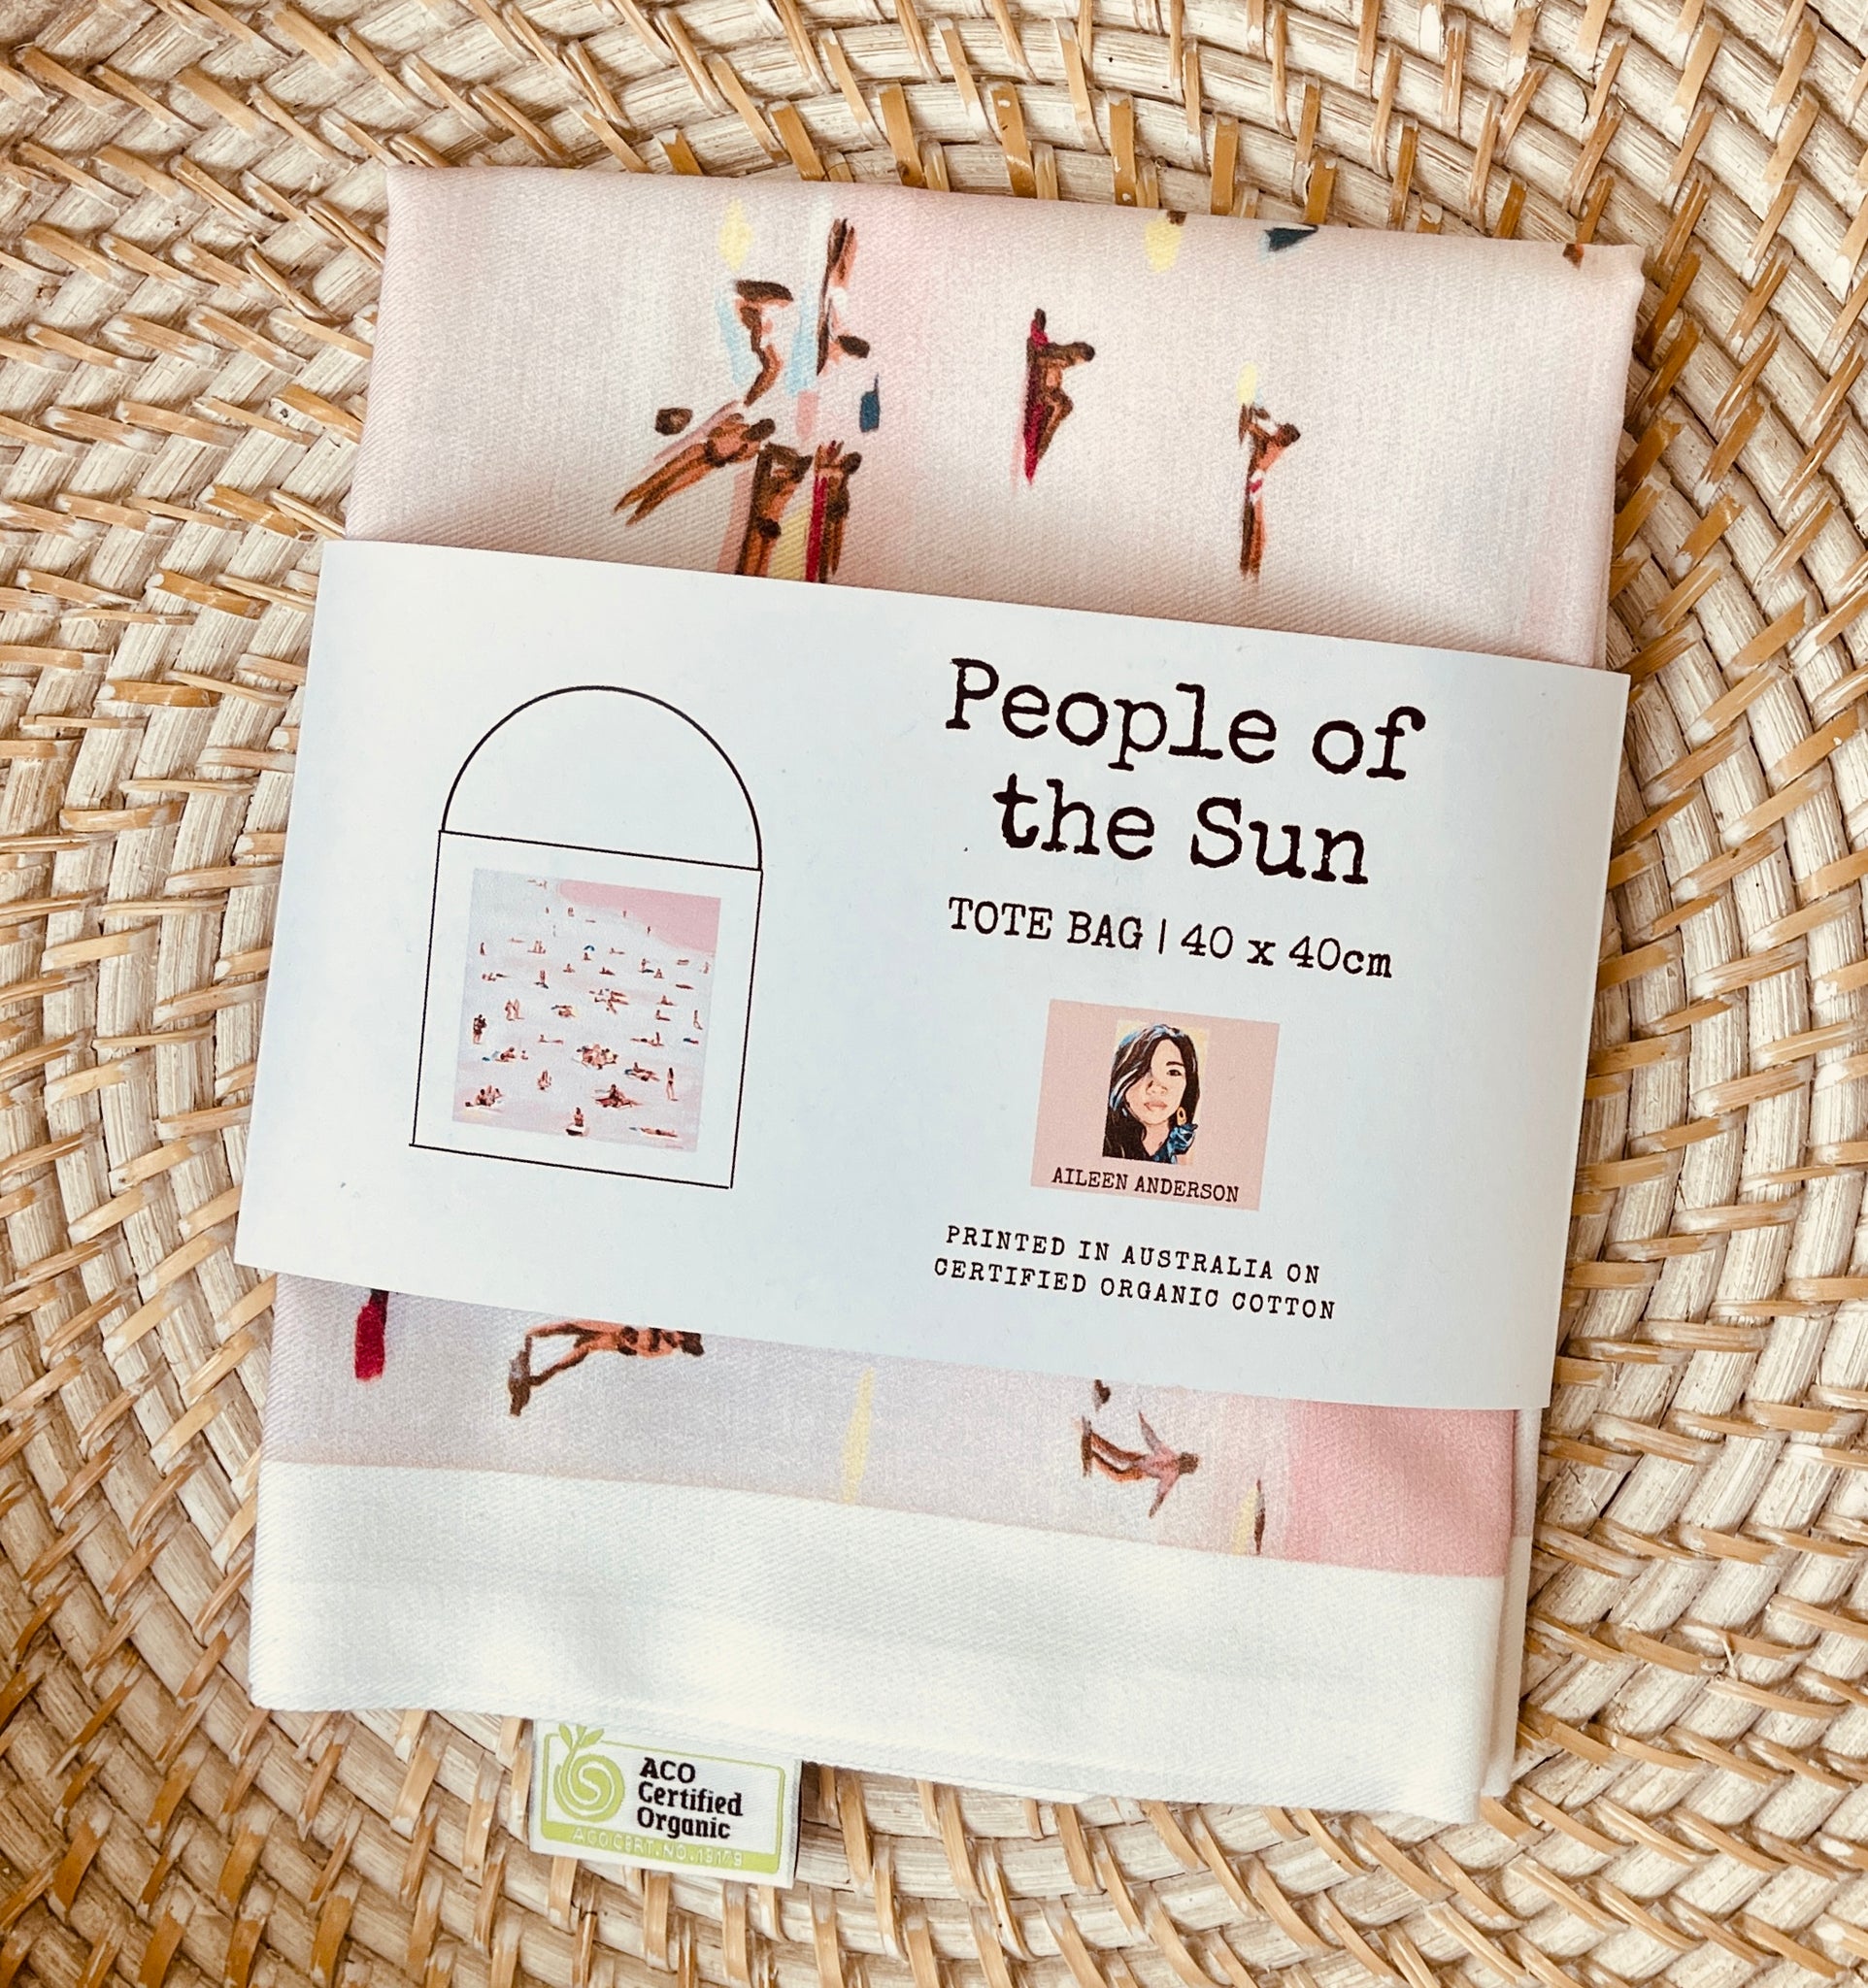 People of the Sun by Aileen Anderson Tote Bag